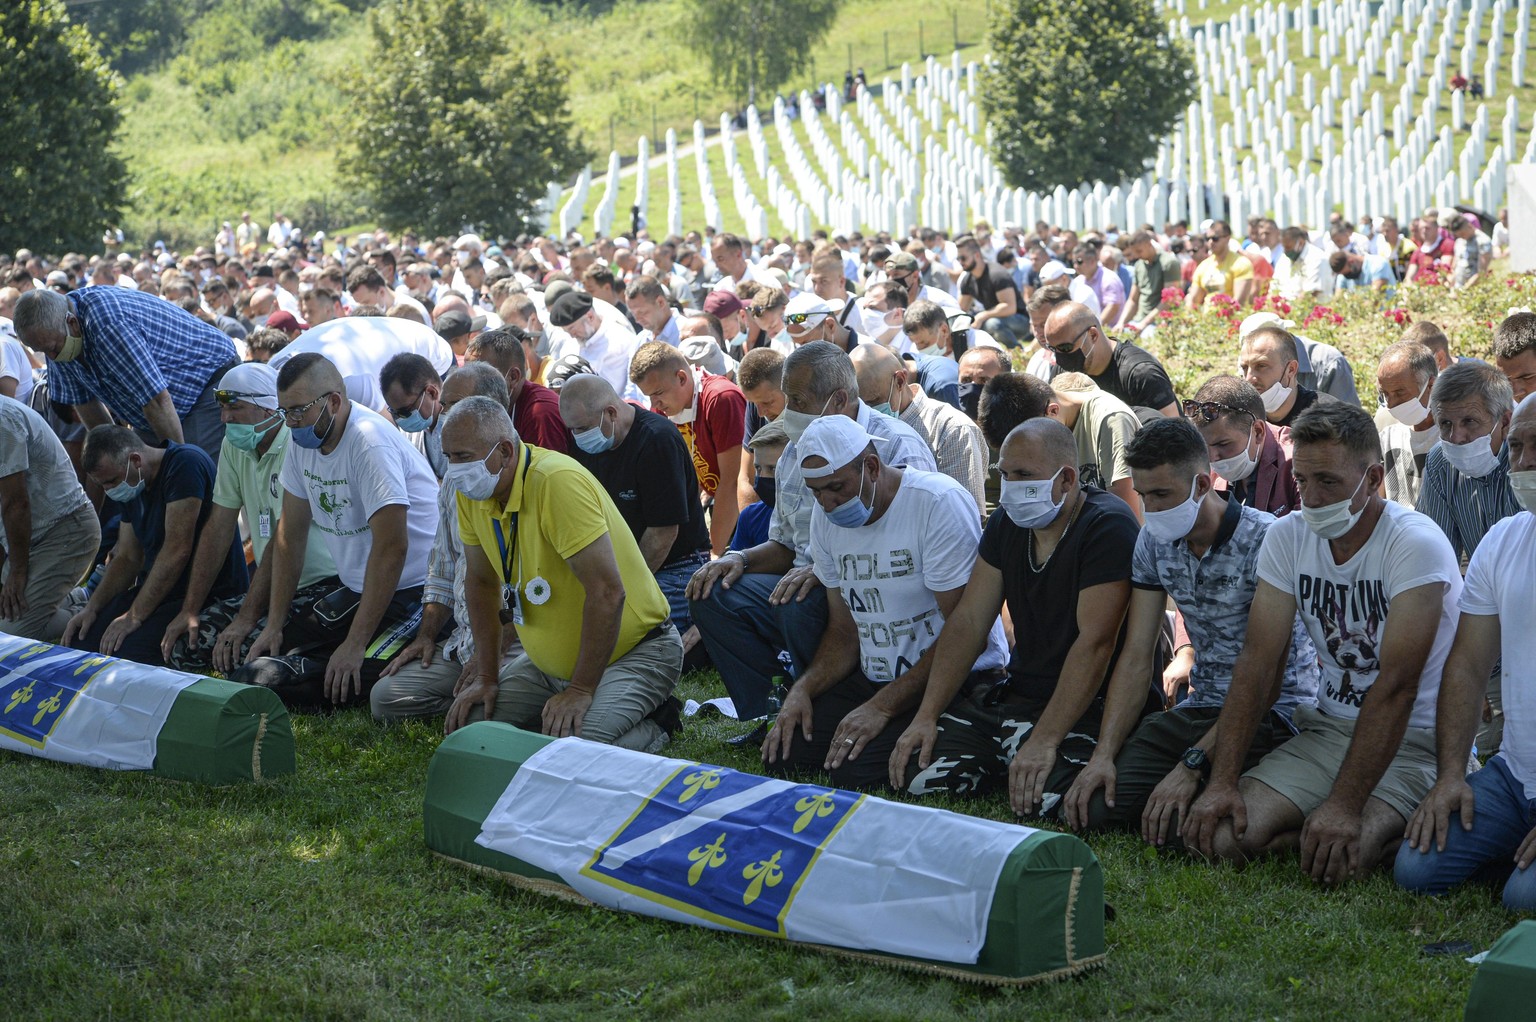 Bosnians pray by the coffins of nine massacre victims in Potocari, near Srebrenica, Bosnia, Saturday, July 11, 2020. Mourners converged on the eastern Bosnian town of Srebrenica for the 25th anniversa ...